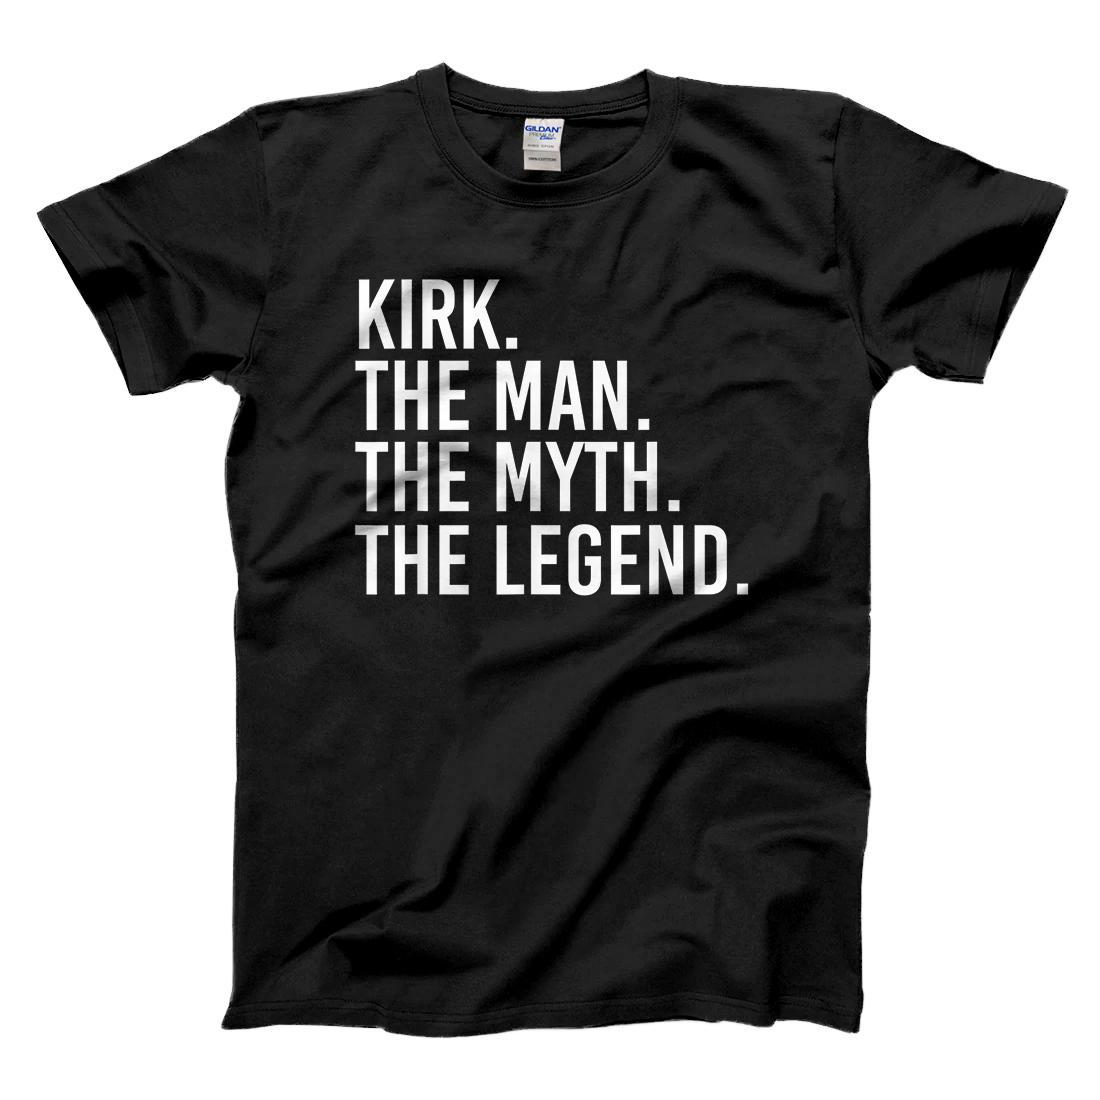 Personalized KIRK. THE MAN. THE MYTH. THE LEGEND. Funny Gift Idea T-Shirt